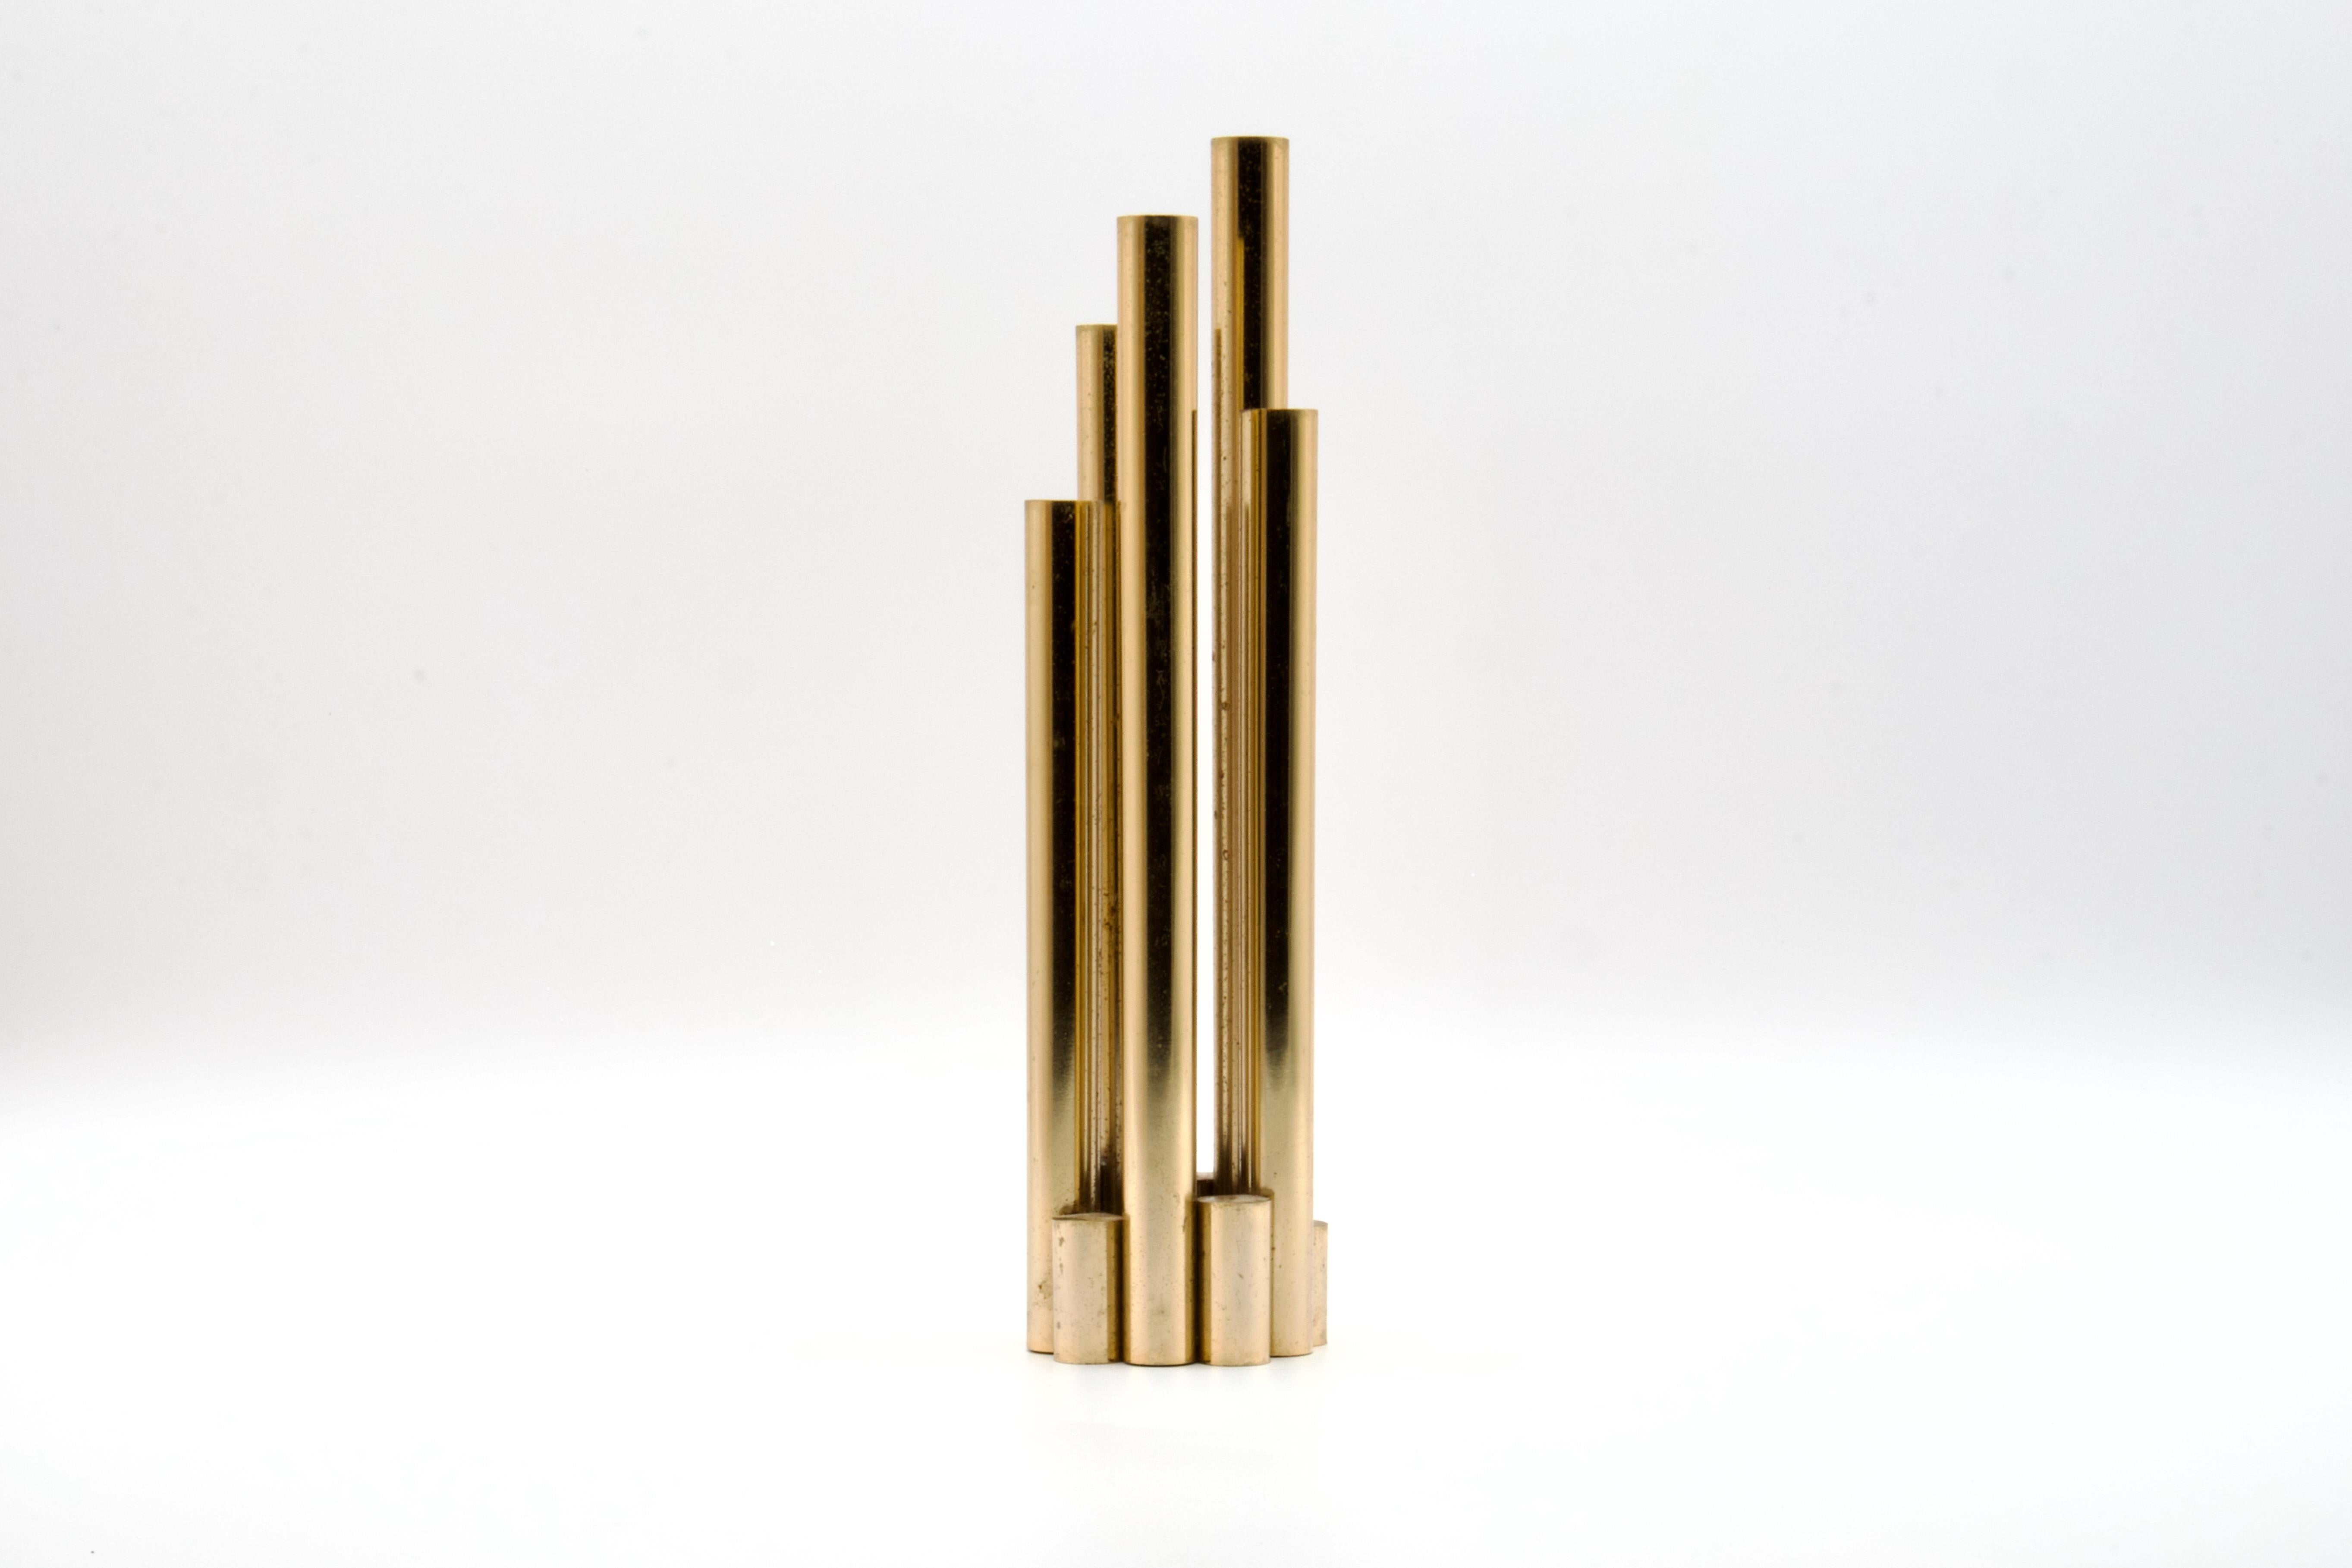 Stunning Mid Century Modern organ vase sculpted from brass tubes and brass rods, Gio Ponti for Christofle style. Sourced in Italy and dating to the early 1960s.

The vase is constructed of 5 tubes of brass of varying heights and an additional 5